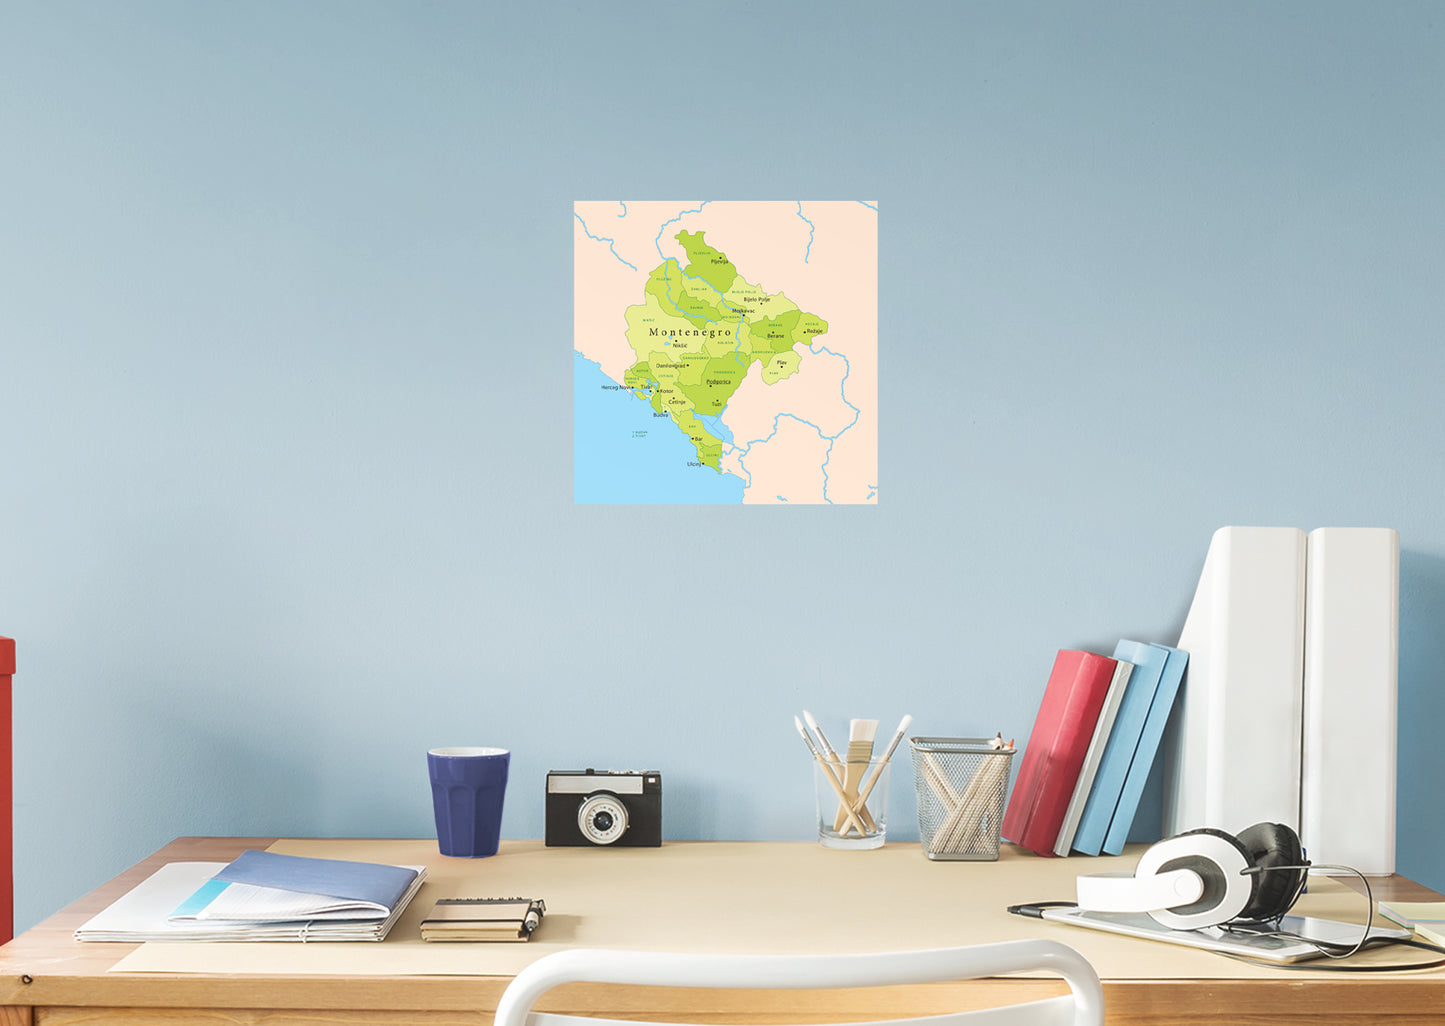 Maps of Europe: Montenegro Mural        -   Removable Wall   Adhesive Decal